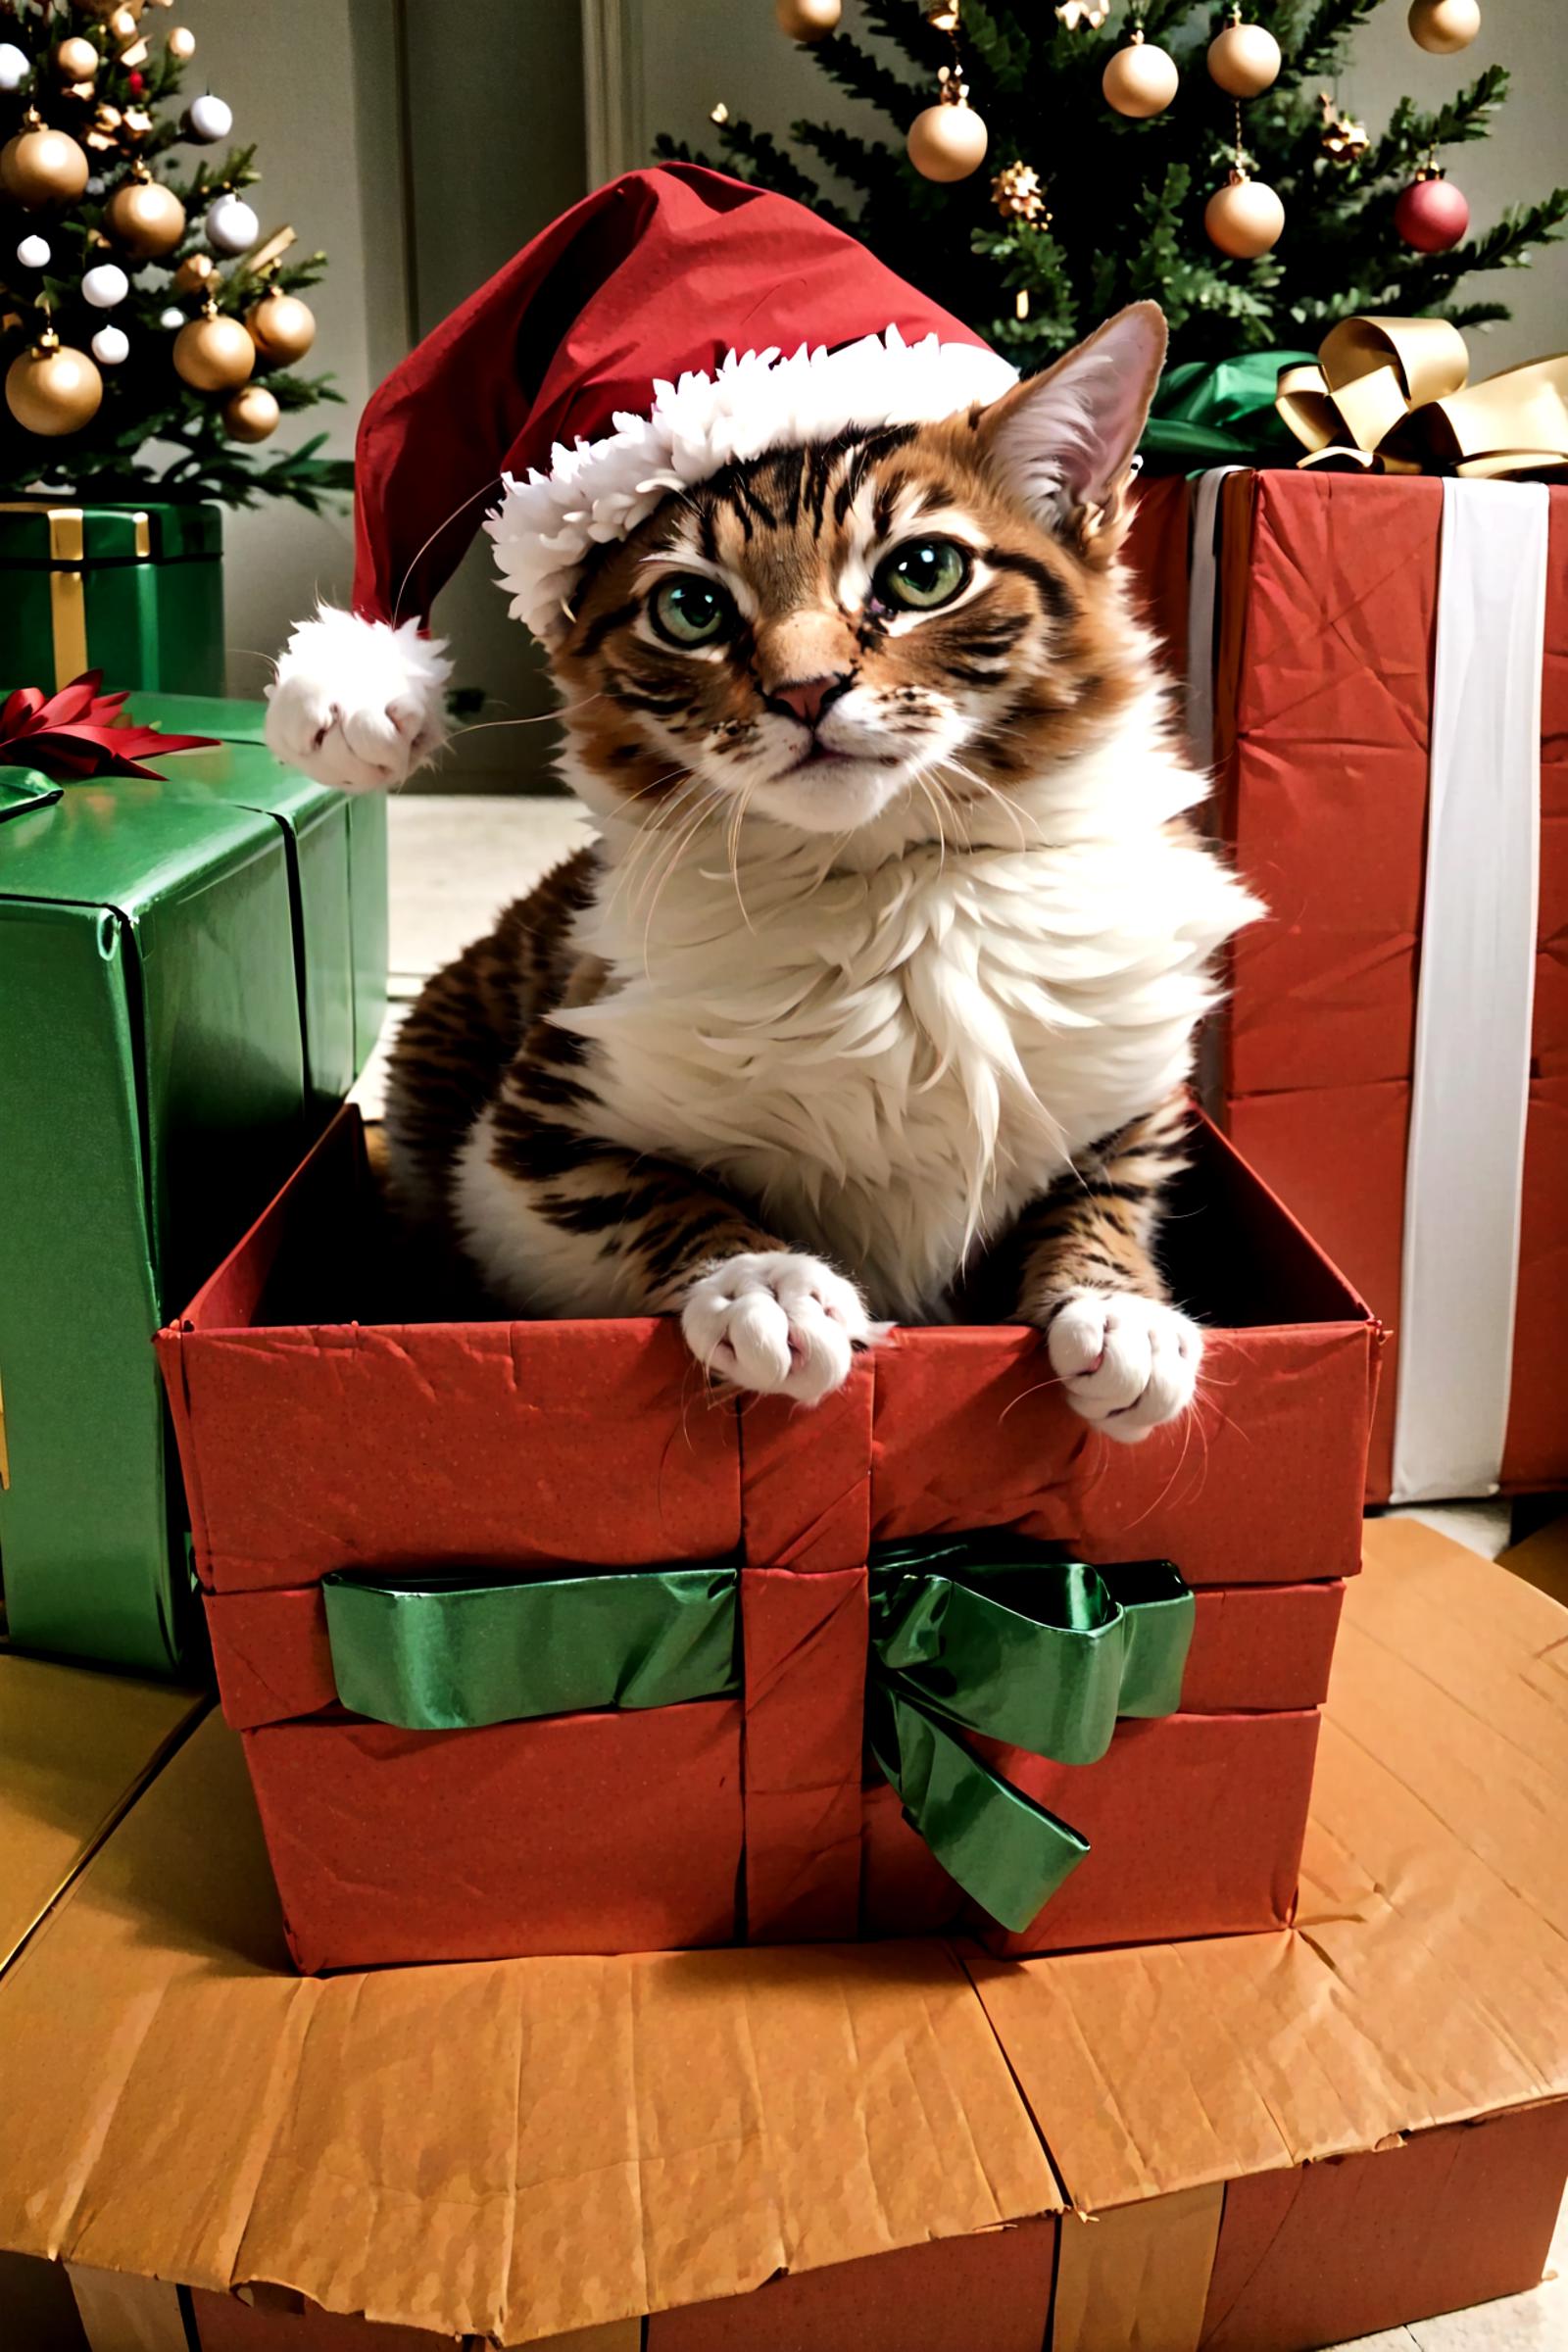 boxing day surprised gift box image by Marader